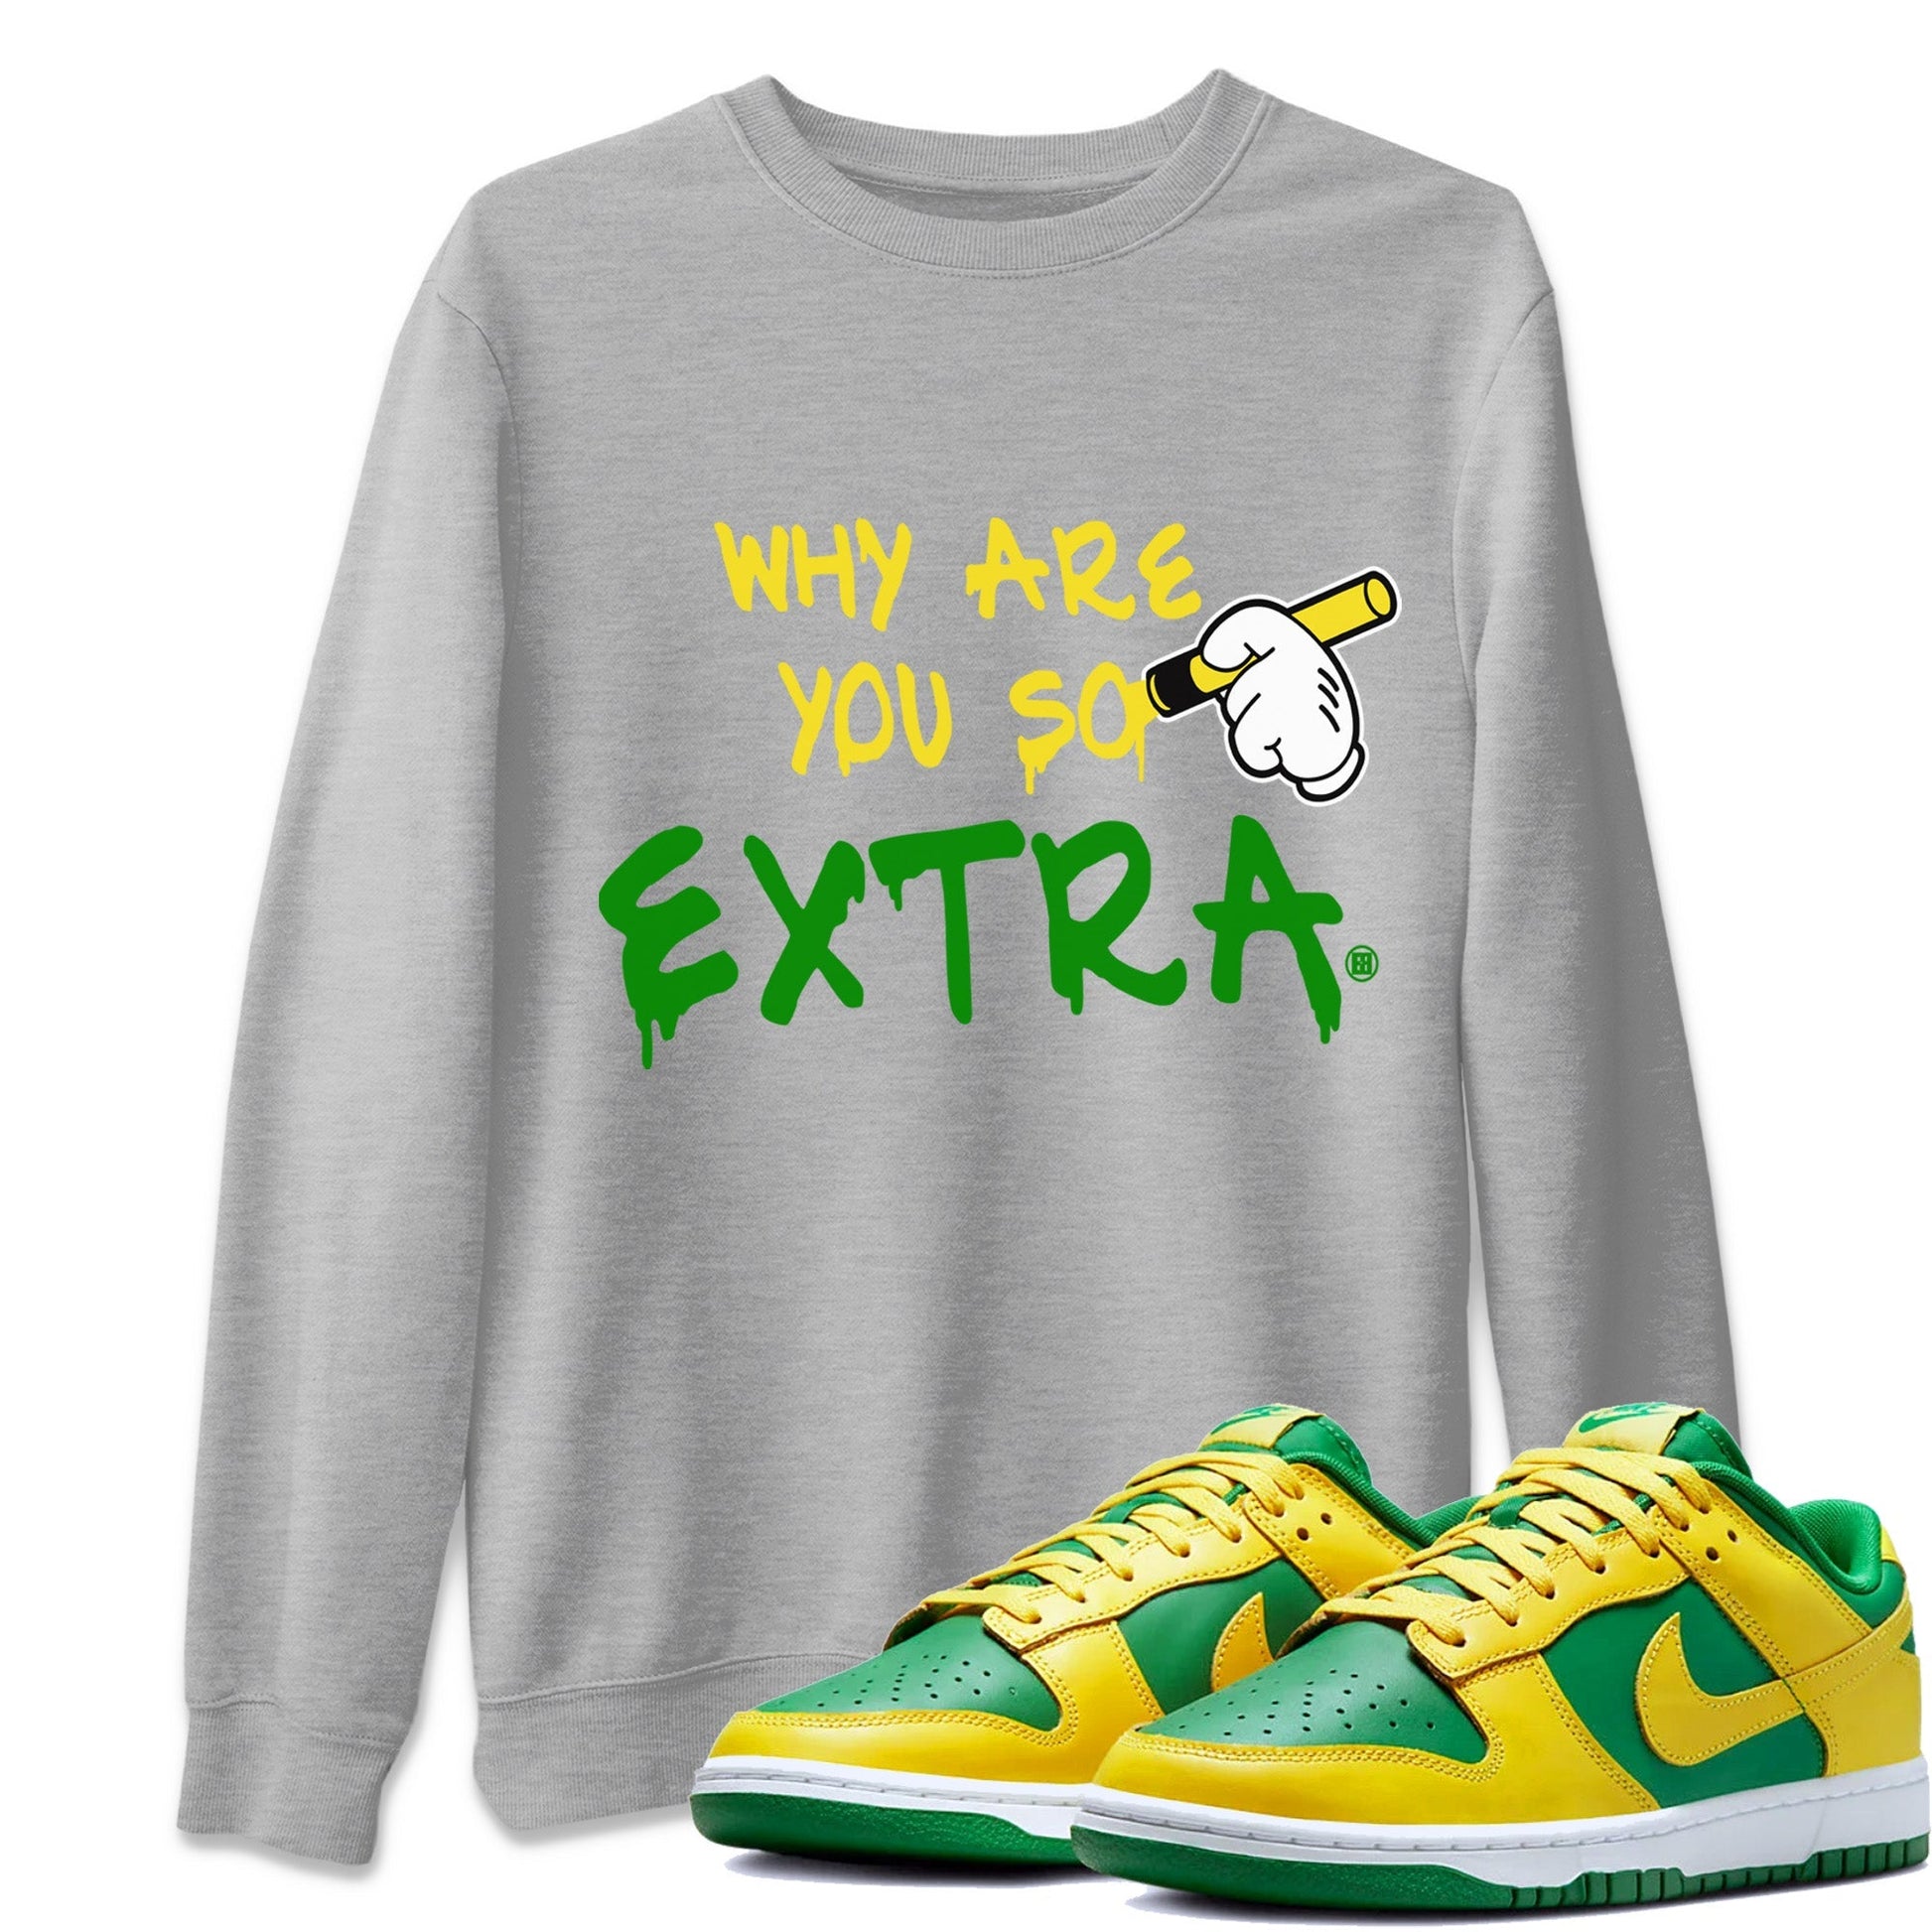 Dunk Reverse Brazil Sneaker Match Tees Why Are You So Extra Sneaker Tees Dunk Reverse Brazil Sneaker Release Tees Unisex Shirts